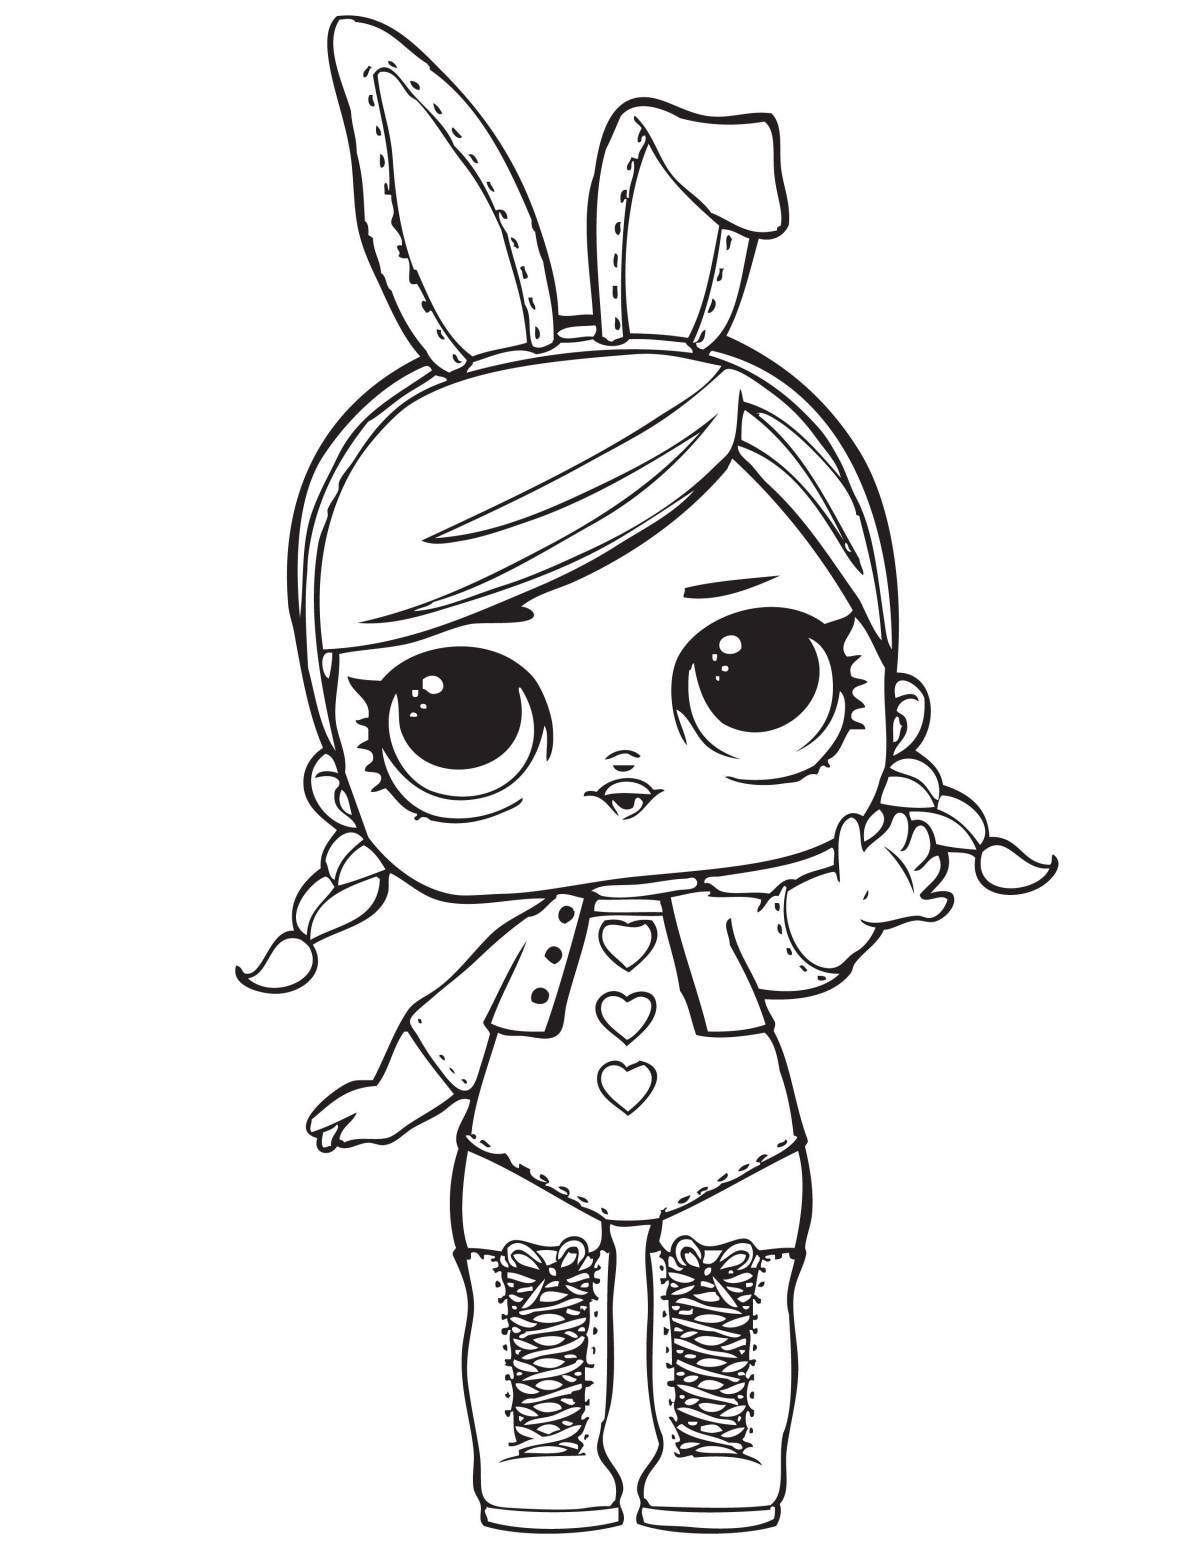 Coloring page charming lola